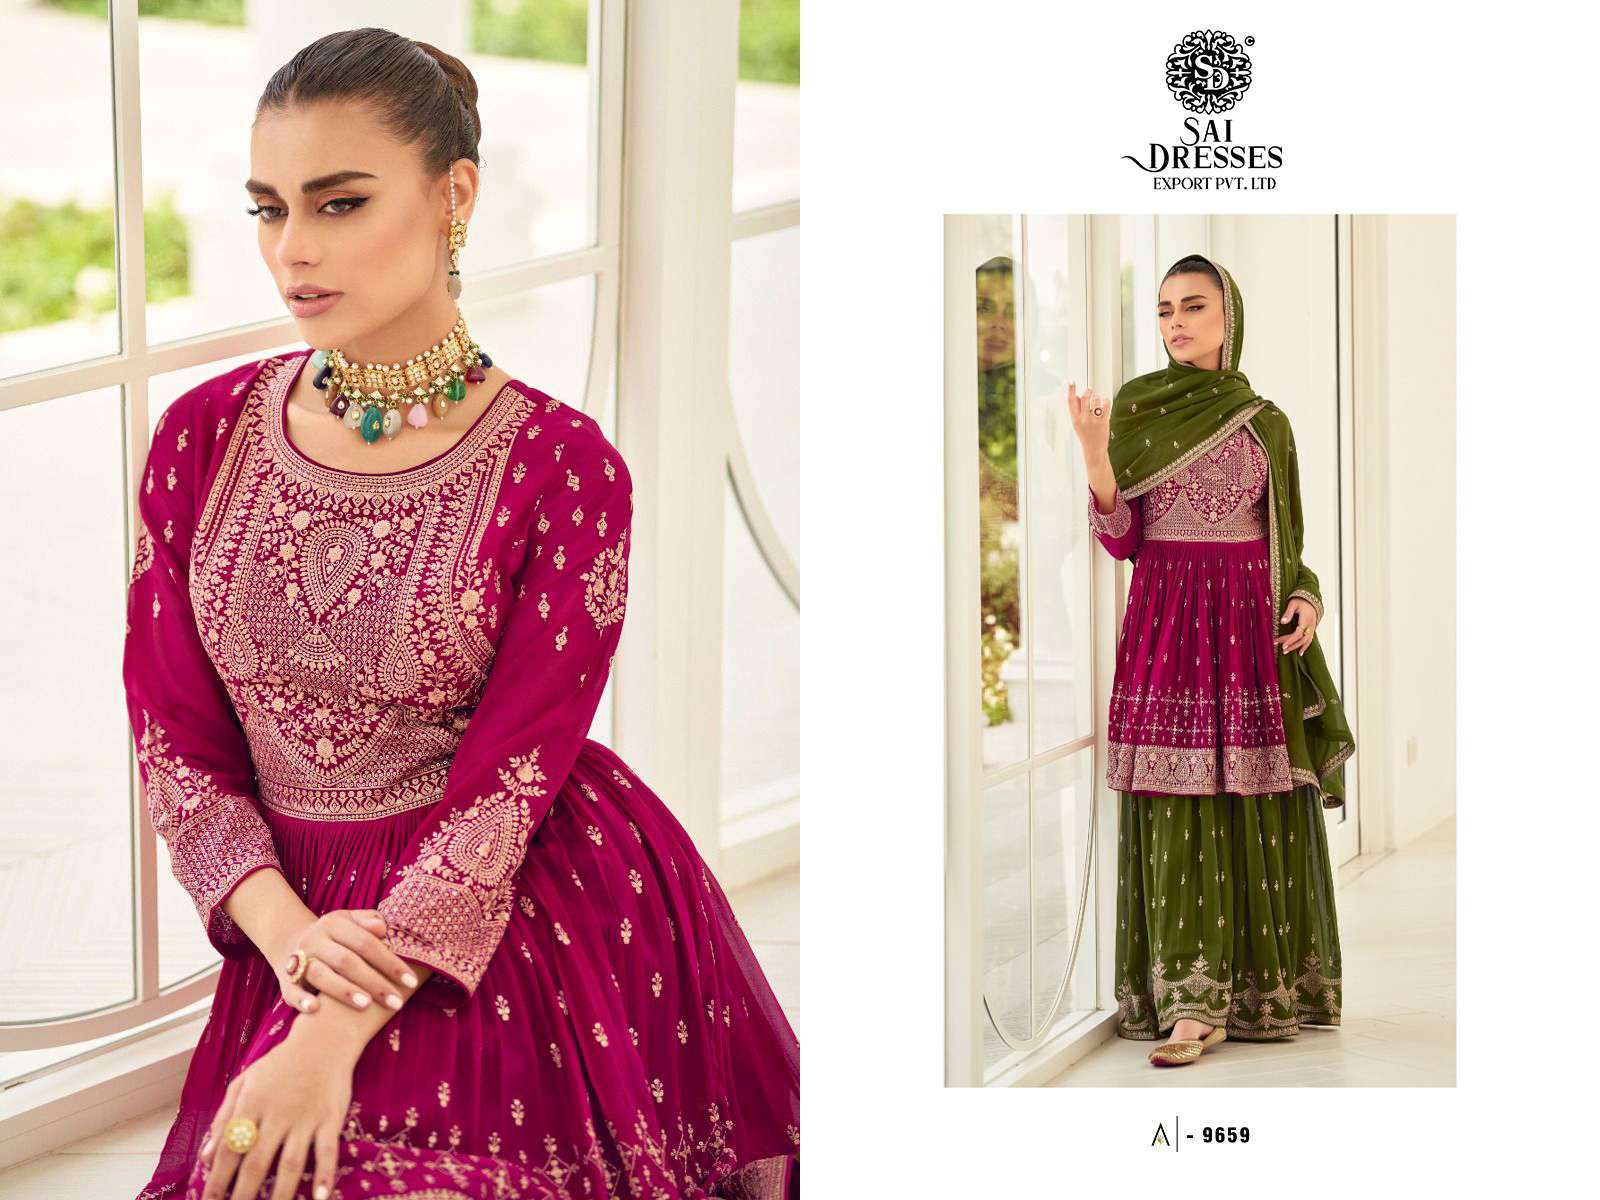 SAI DRESSES PRESENT SOMYA READYMADE WEDDING WEAR HEAVY EMBROIDERED PLAZZO STYLE DESIGNER SUITS IN WHOLESALE RATE IN SURAT